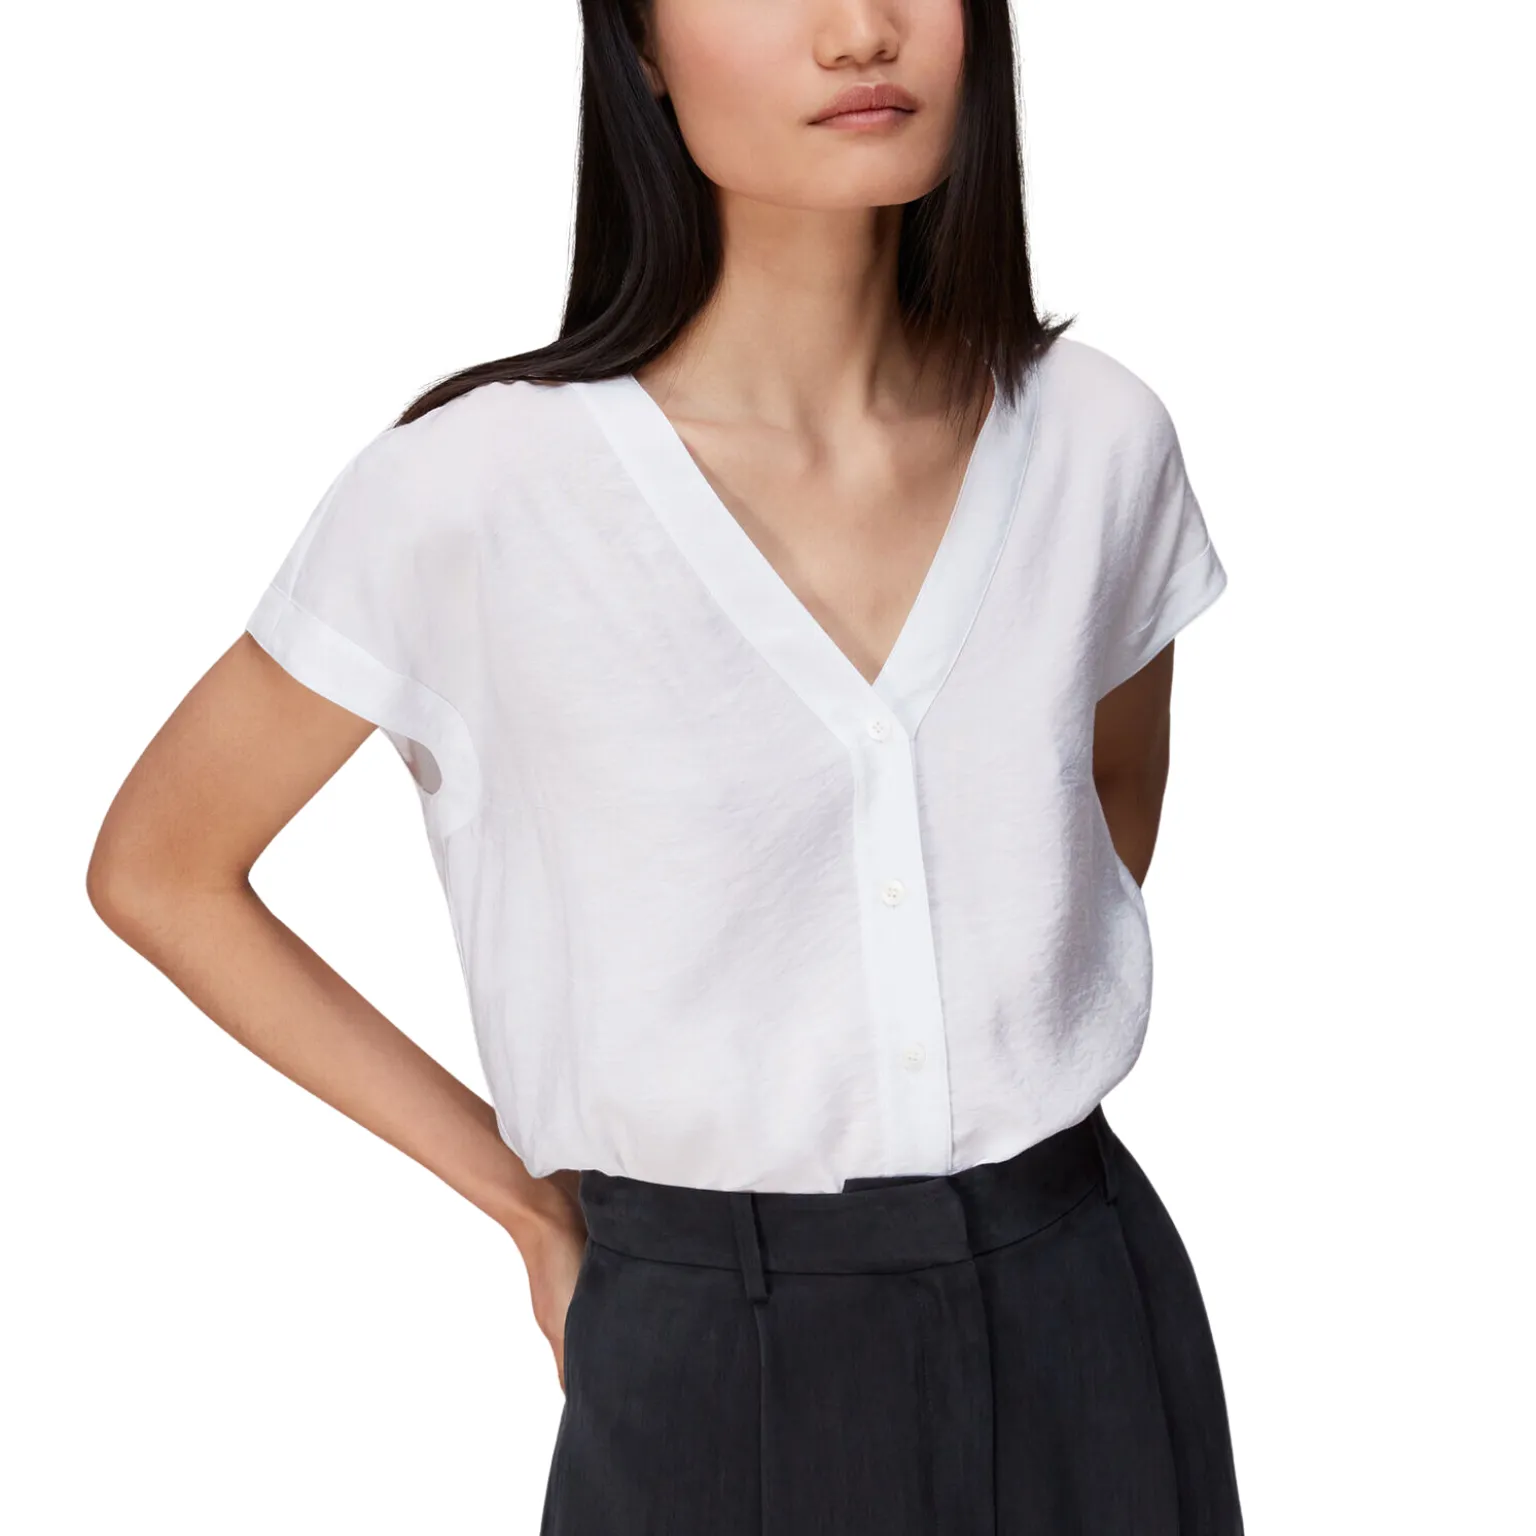 V-Neck Blouse Manufacturing with superior quality